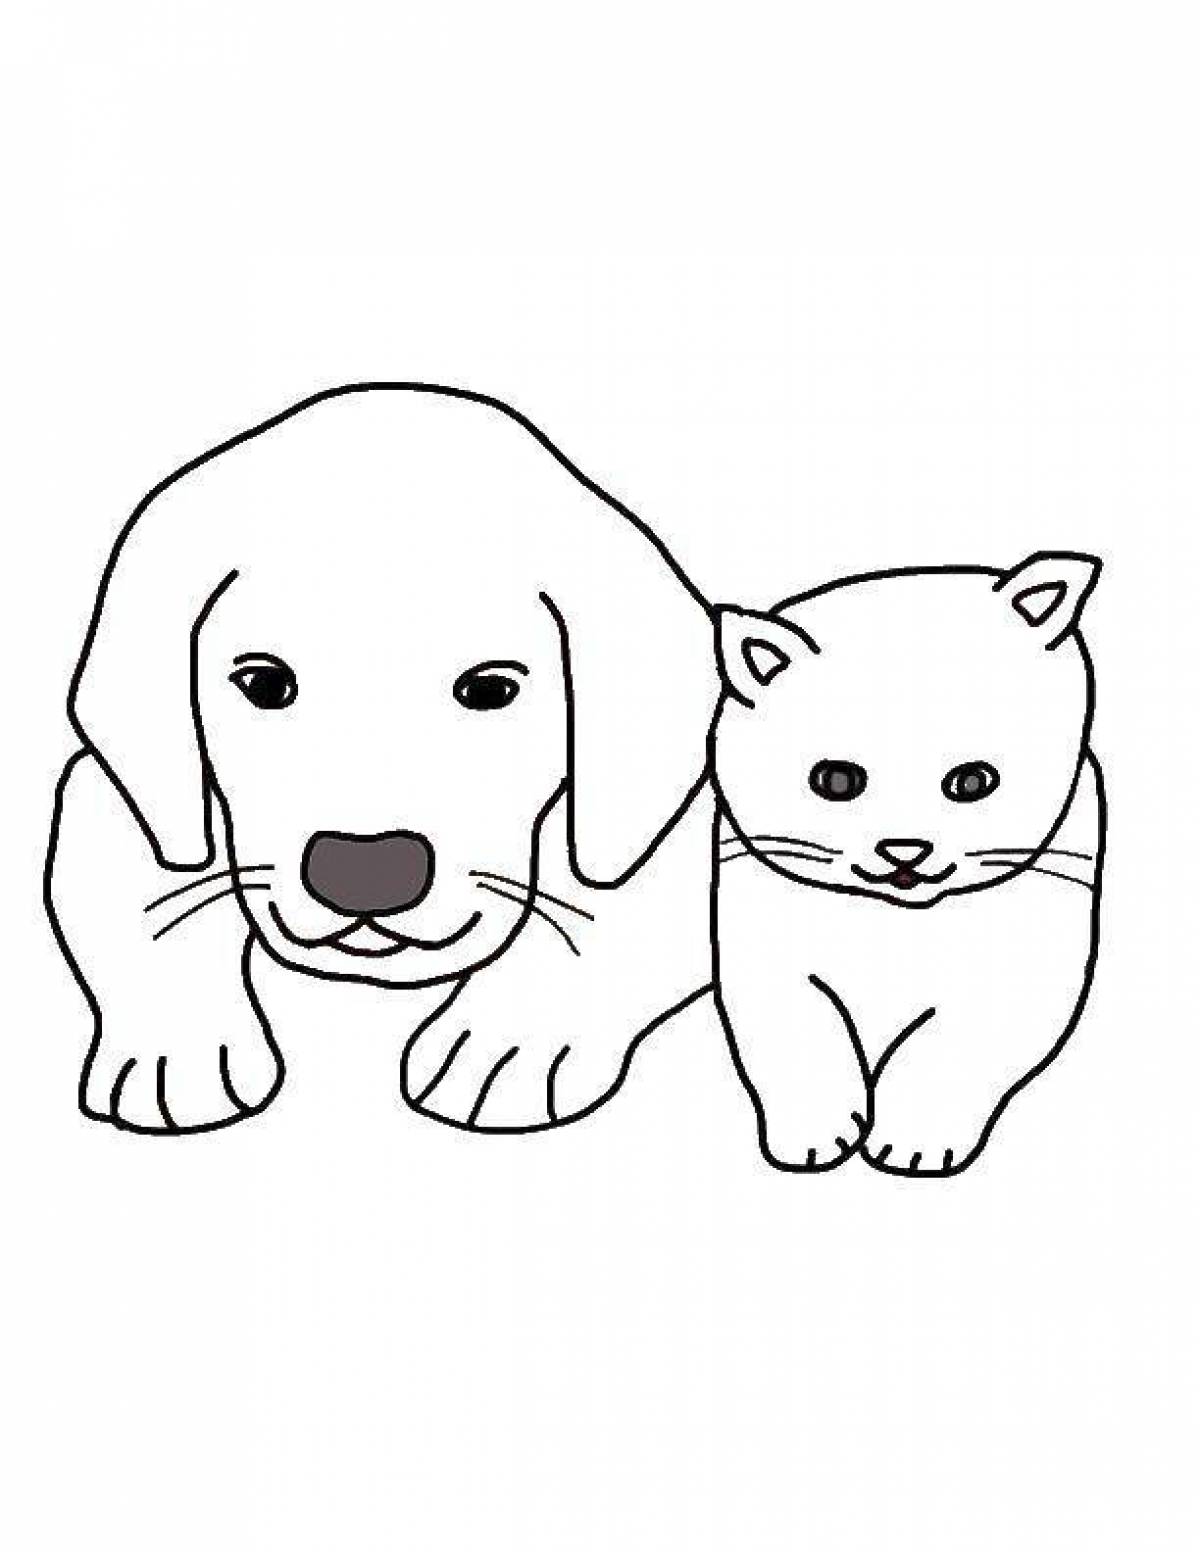 Playful coloring dog kittens for kids